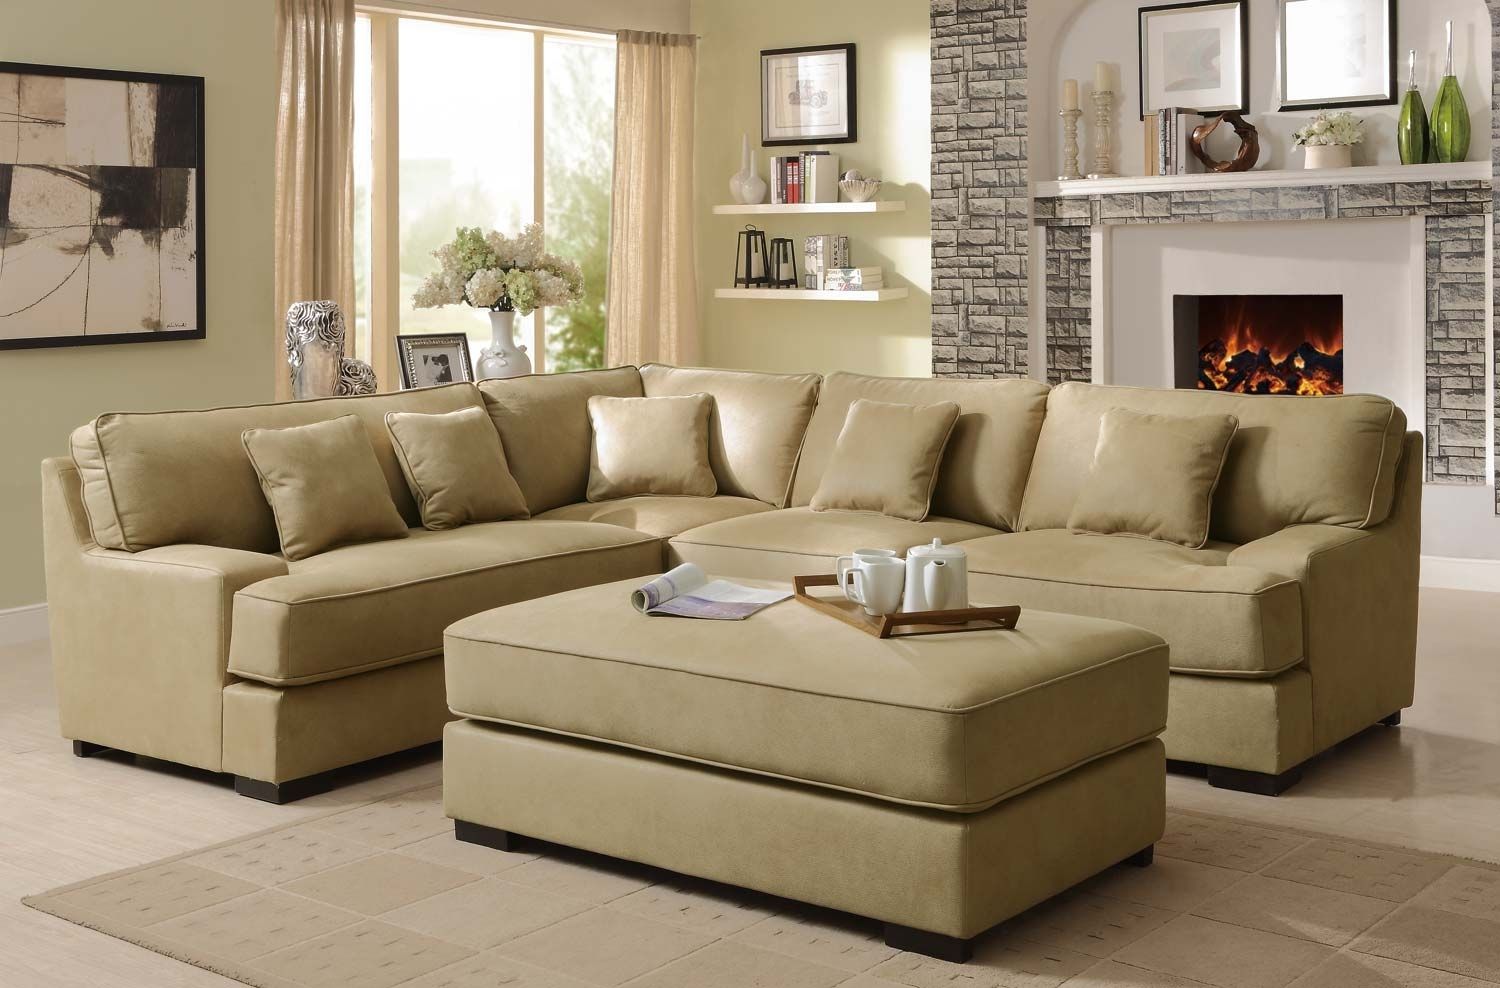 Sectional Sofa Design: Amazing Beige Sectional Sofas Beige Leather Throughout Beige Sectional Sofas (Photo 6 of 15)